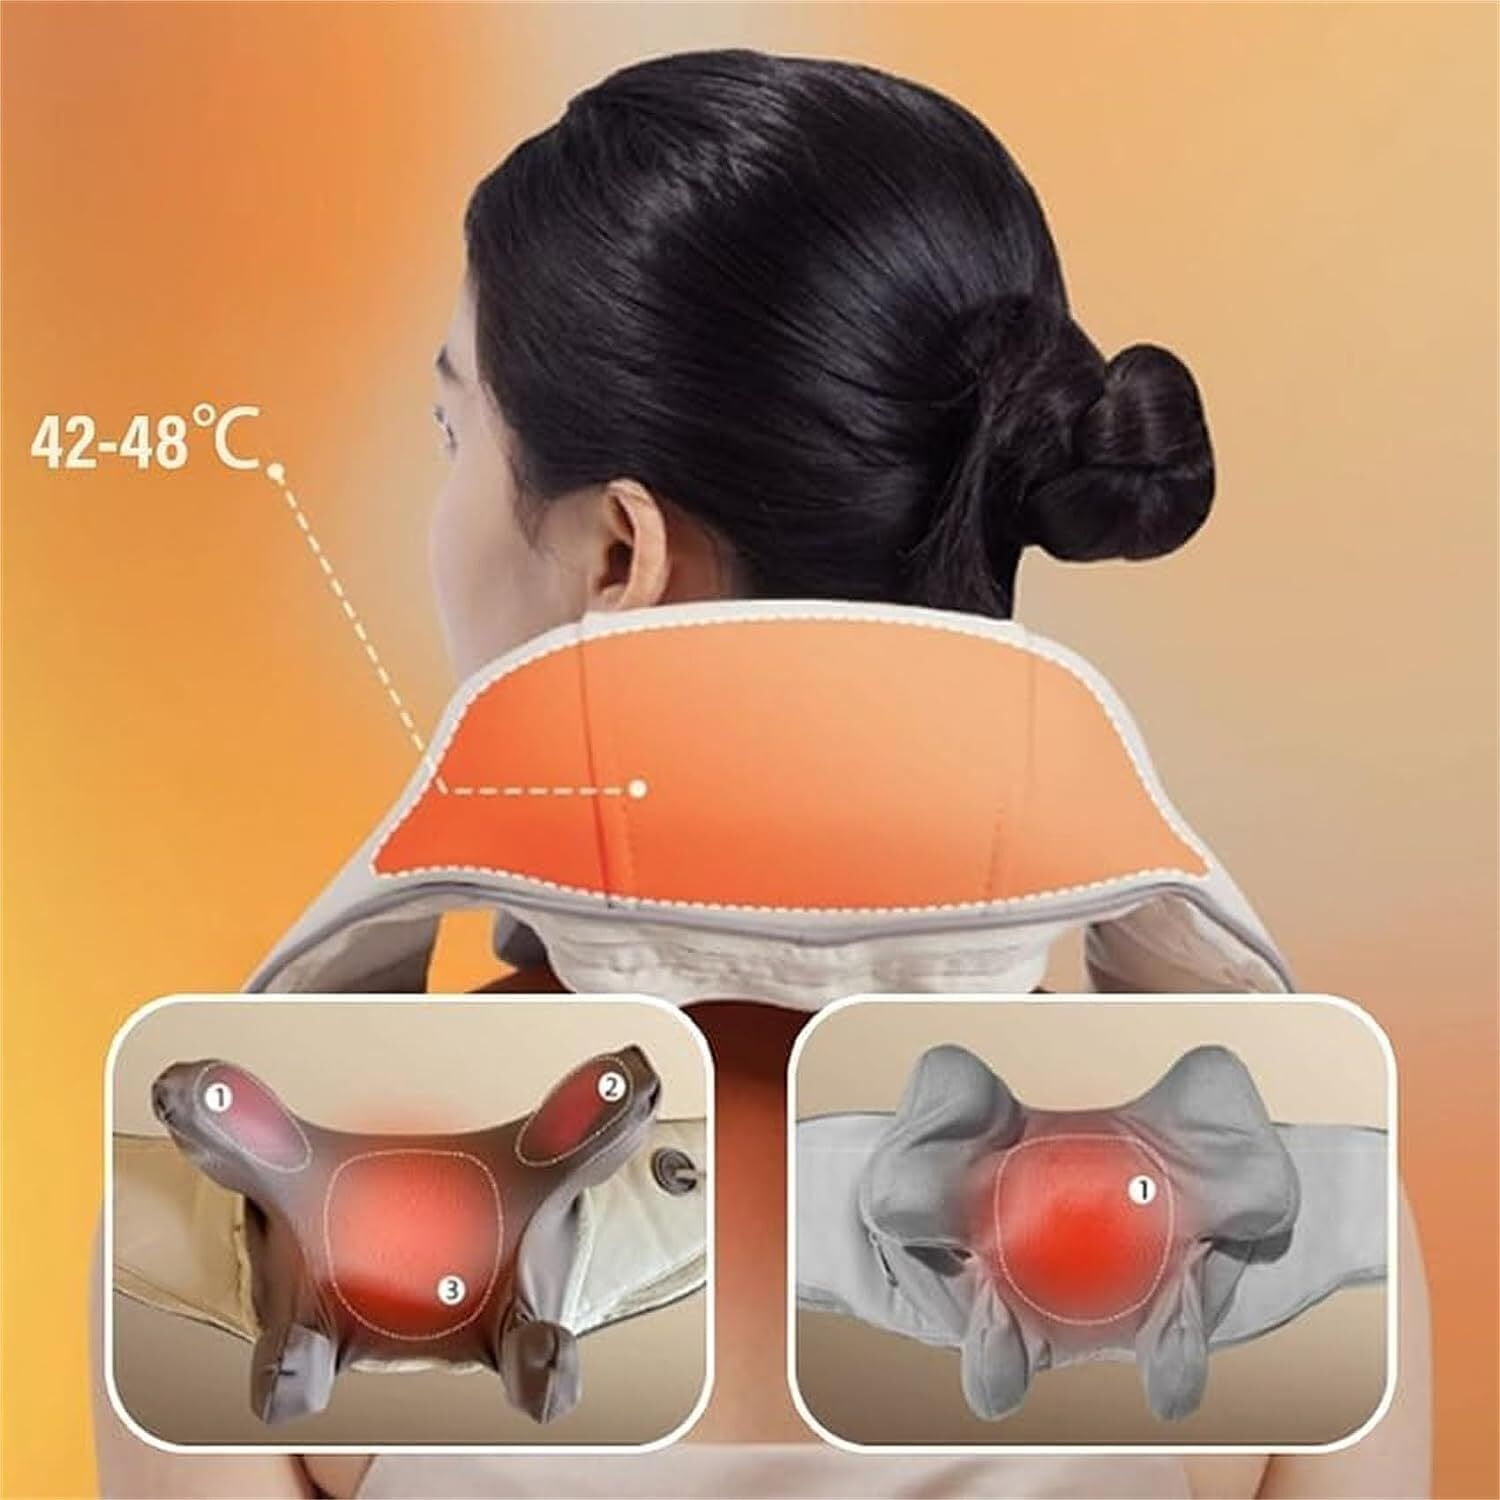 Massagers for Neck and Shoulder with Heat Goletsure Pain Relief-Deep  5DKneading